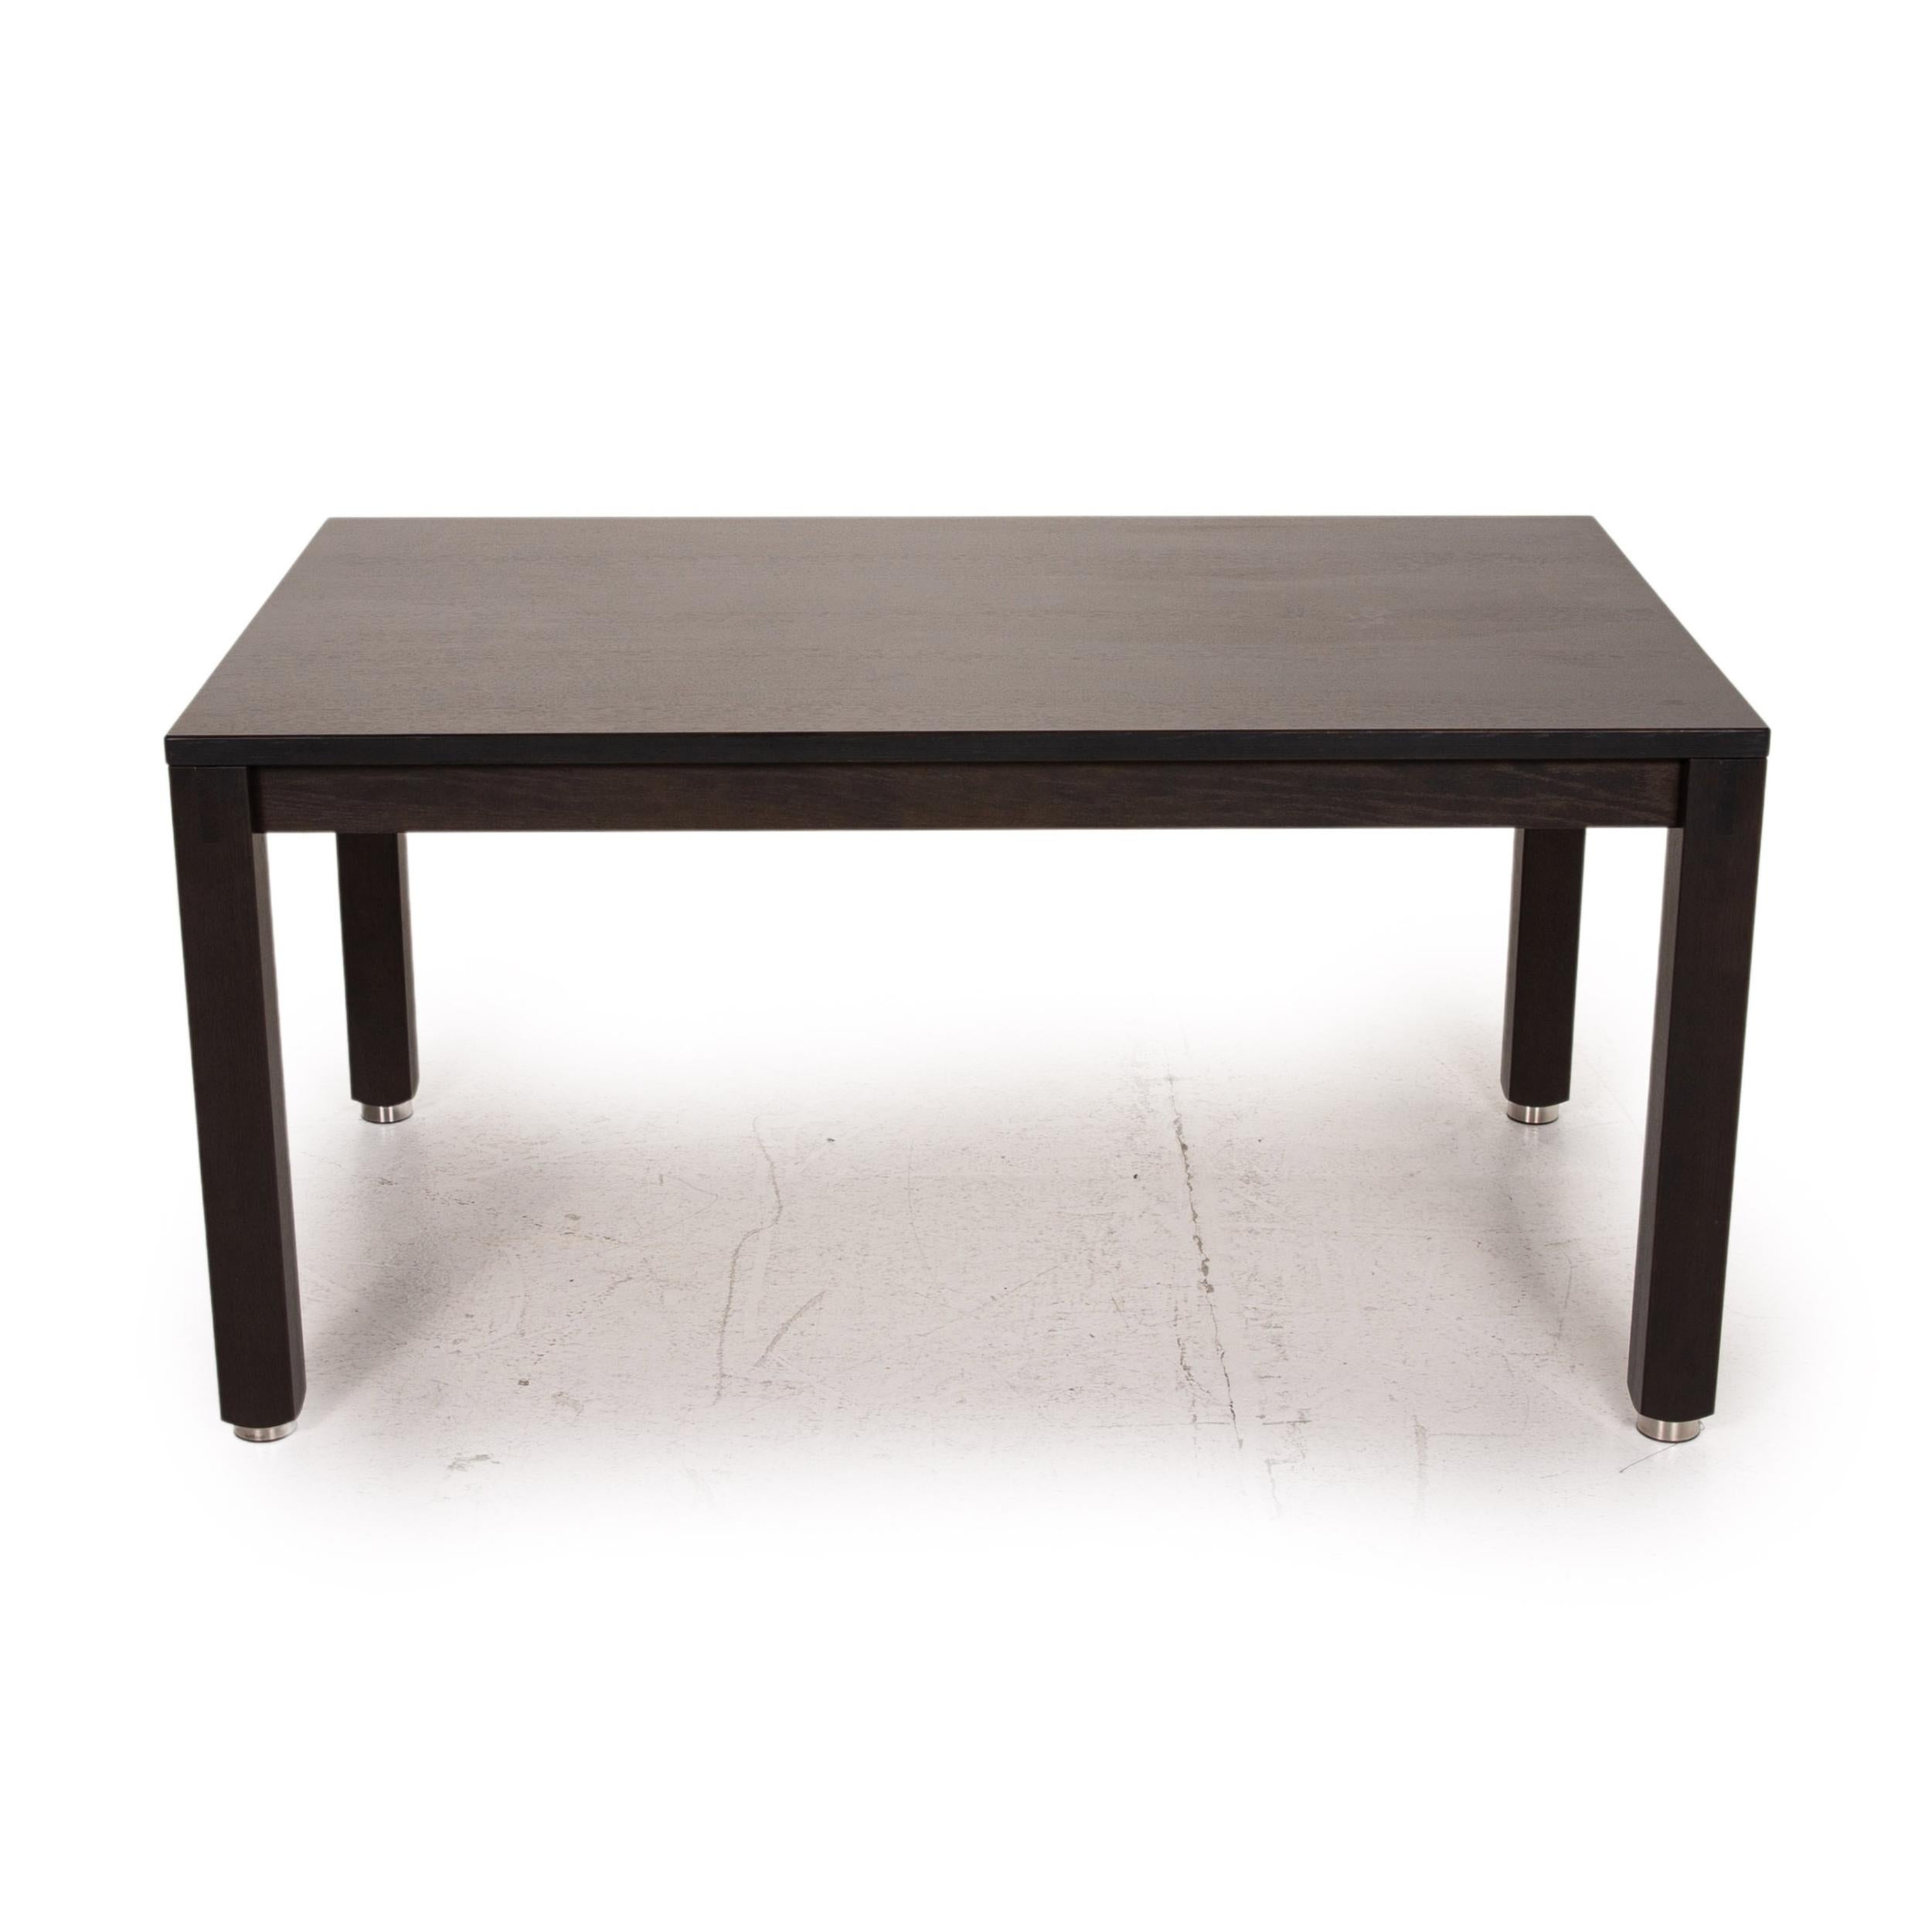 Wood Bulthaup Corpus Dining Table Dark Brown Brown Table For Sale